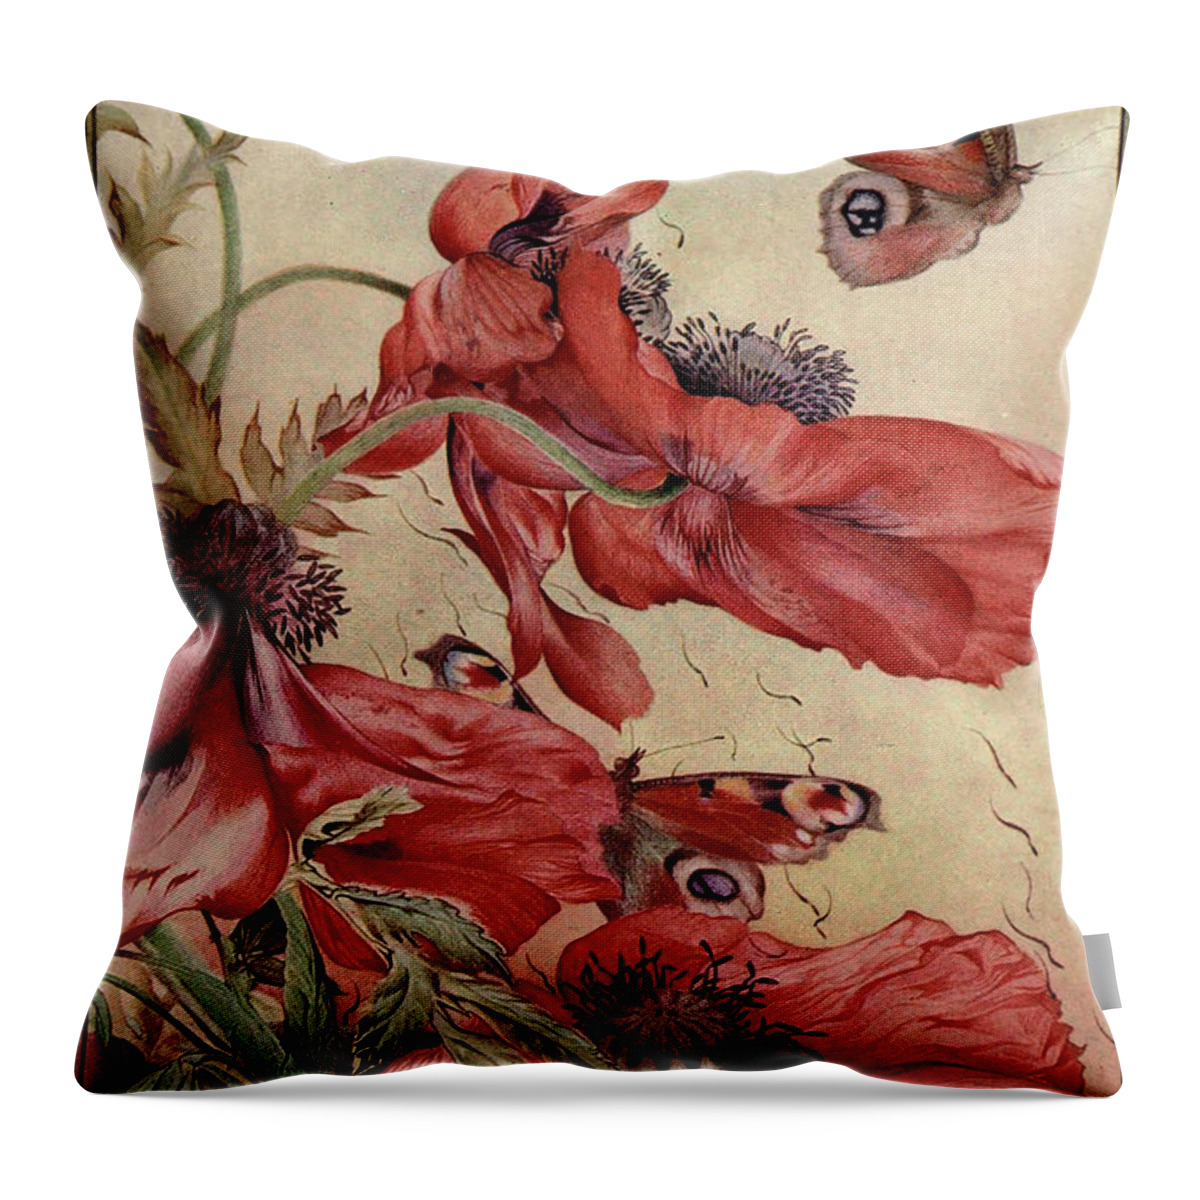 Botanical & Floral+flowers+other Throw Pillow featuring the painting Garden Fantasy IIi by Unknown